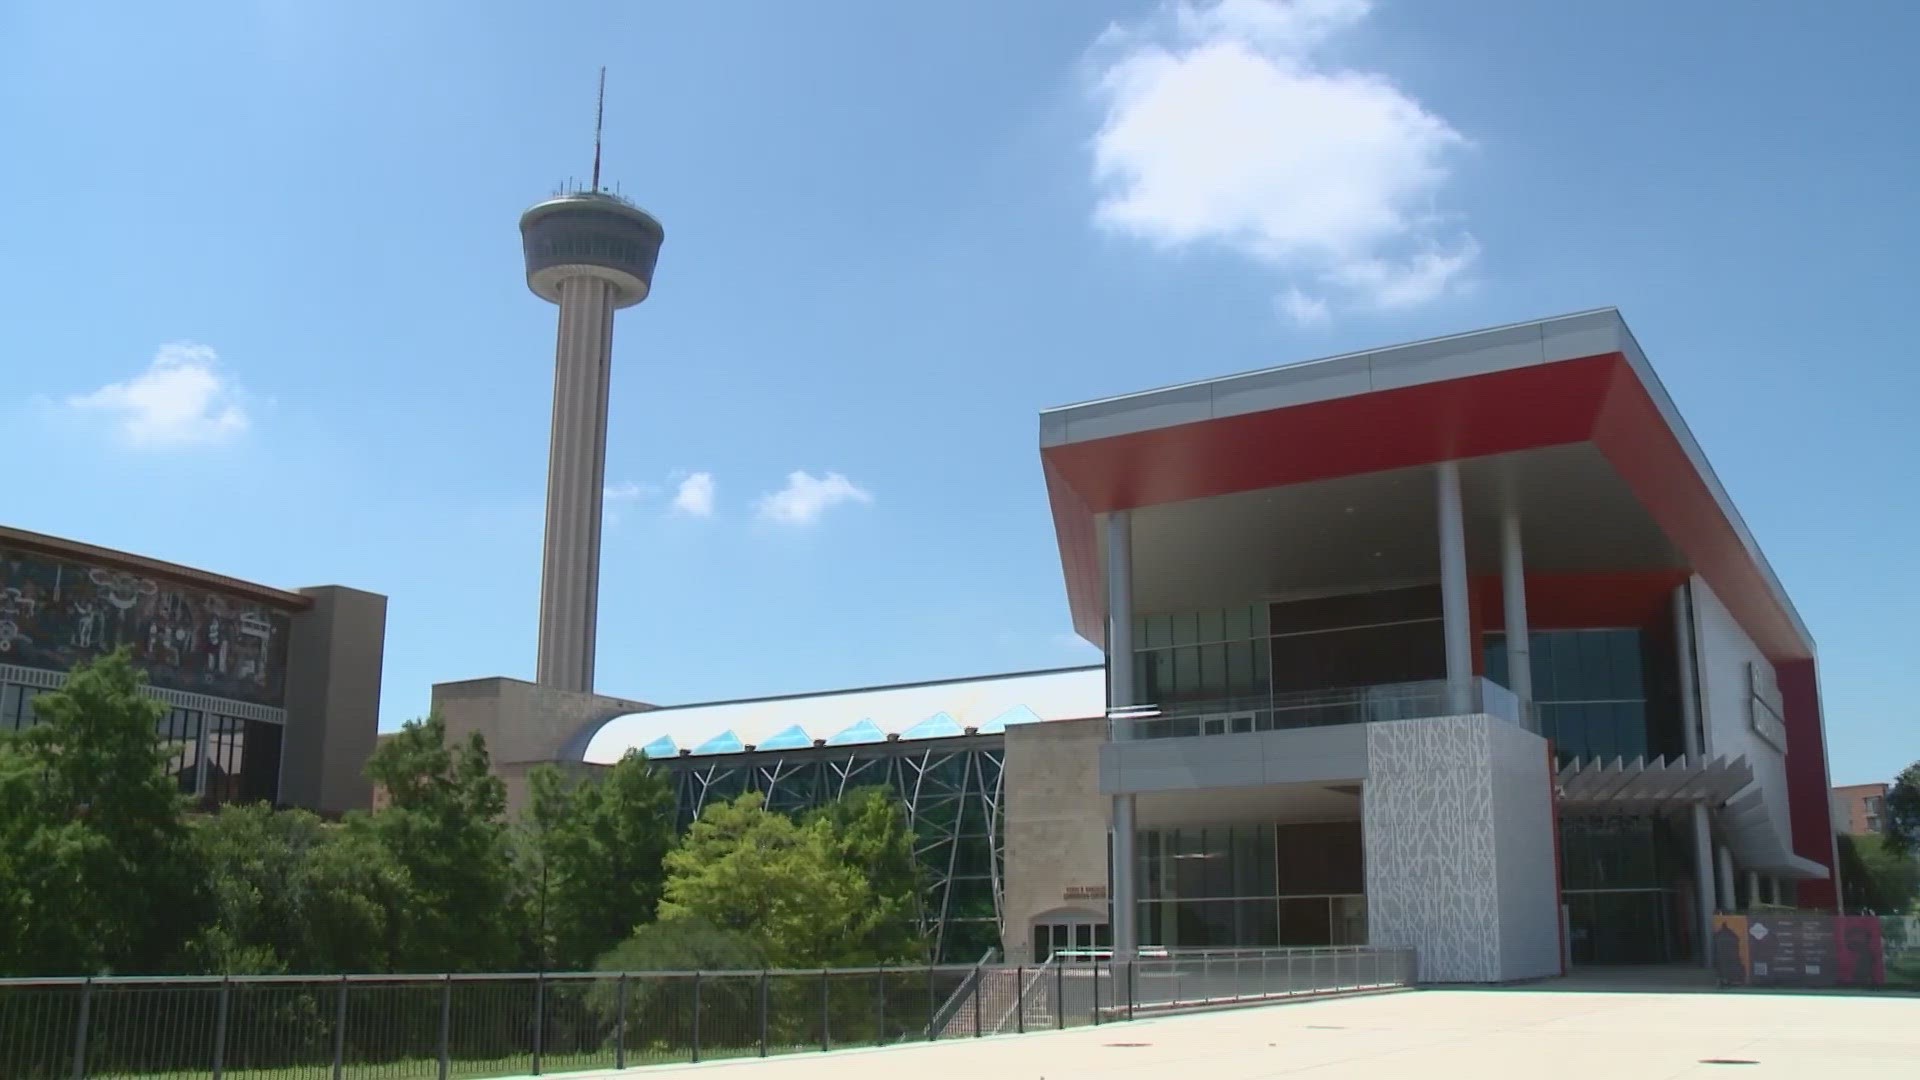 Upgrades would help the city attract more conventions and events that are currently landing out of state instead.